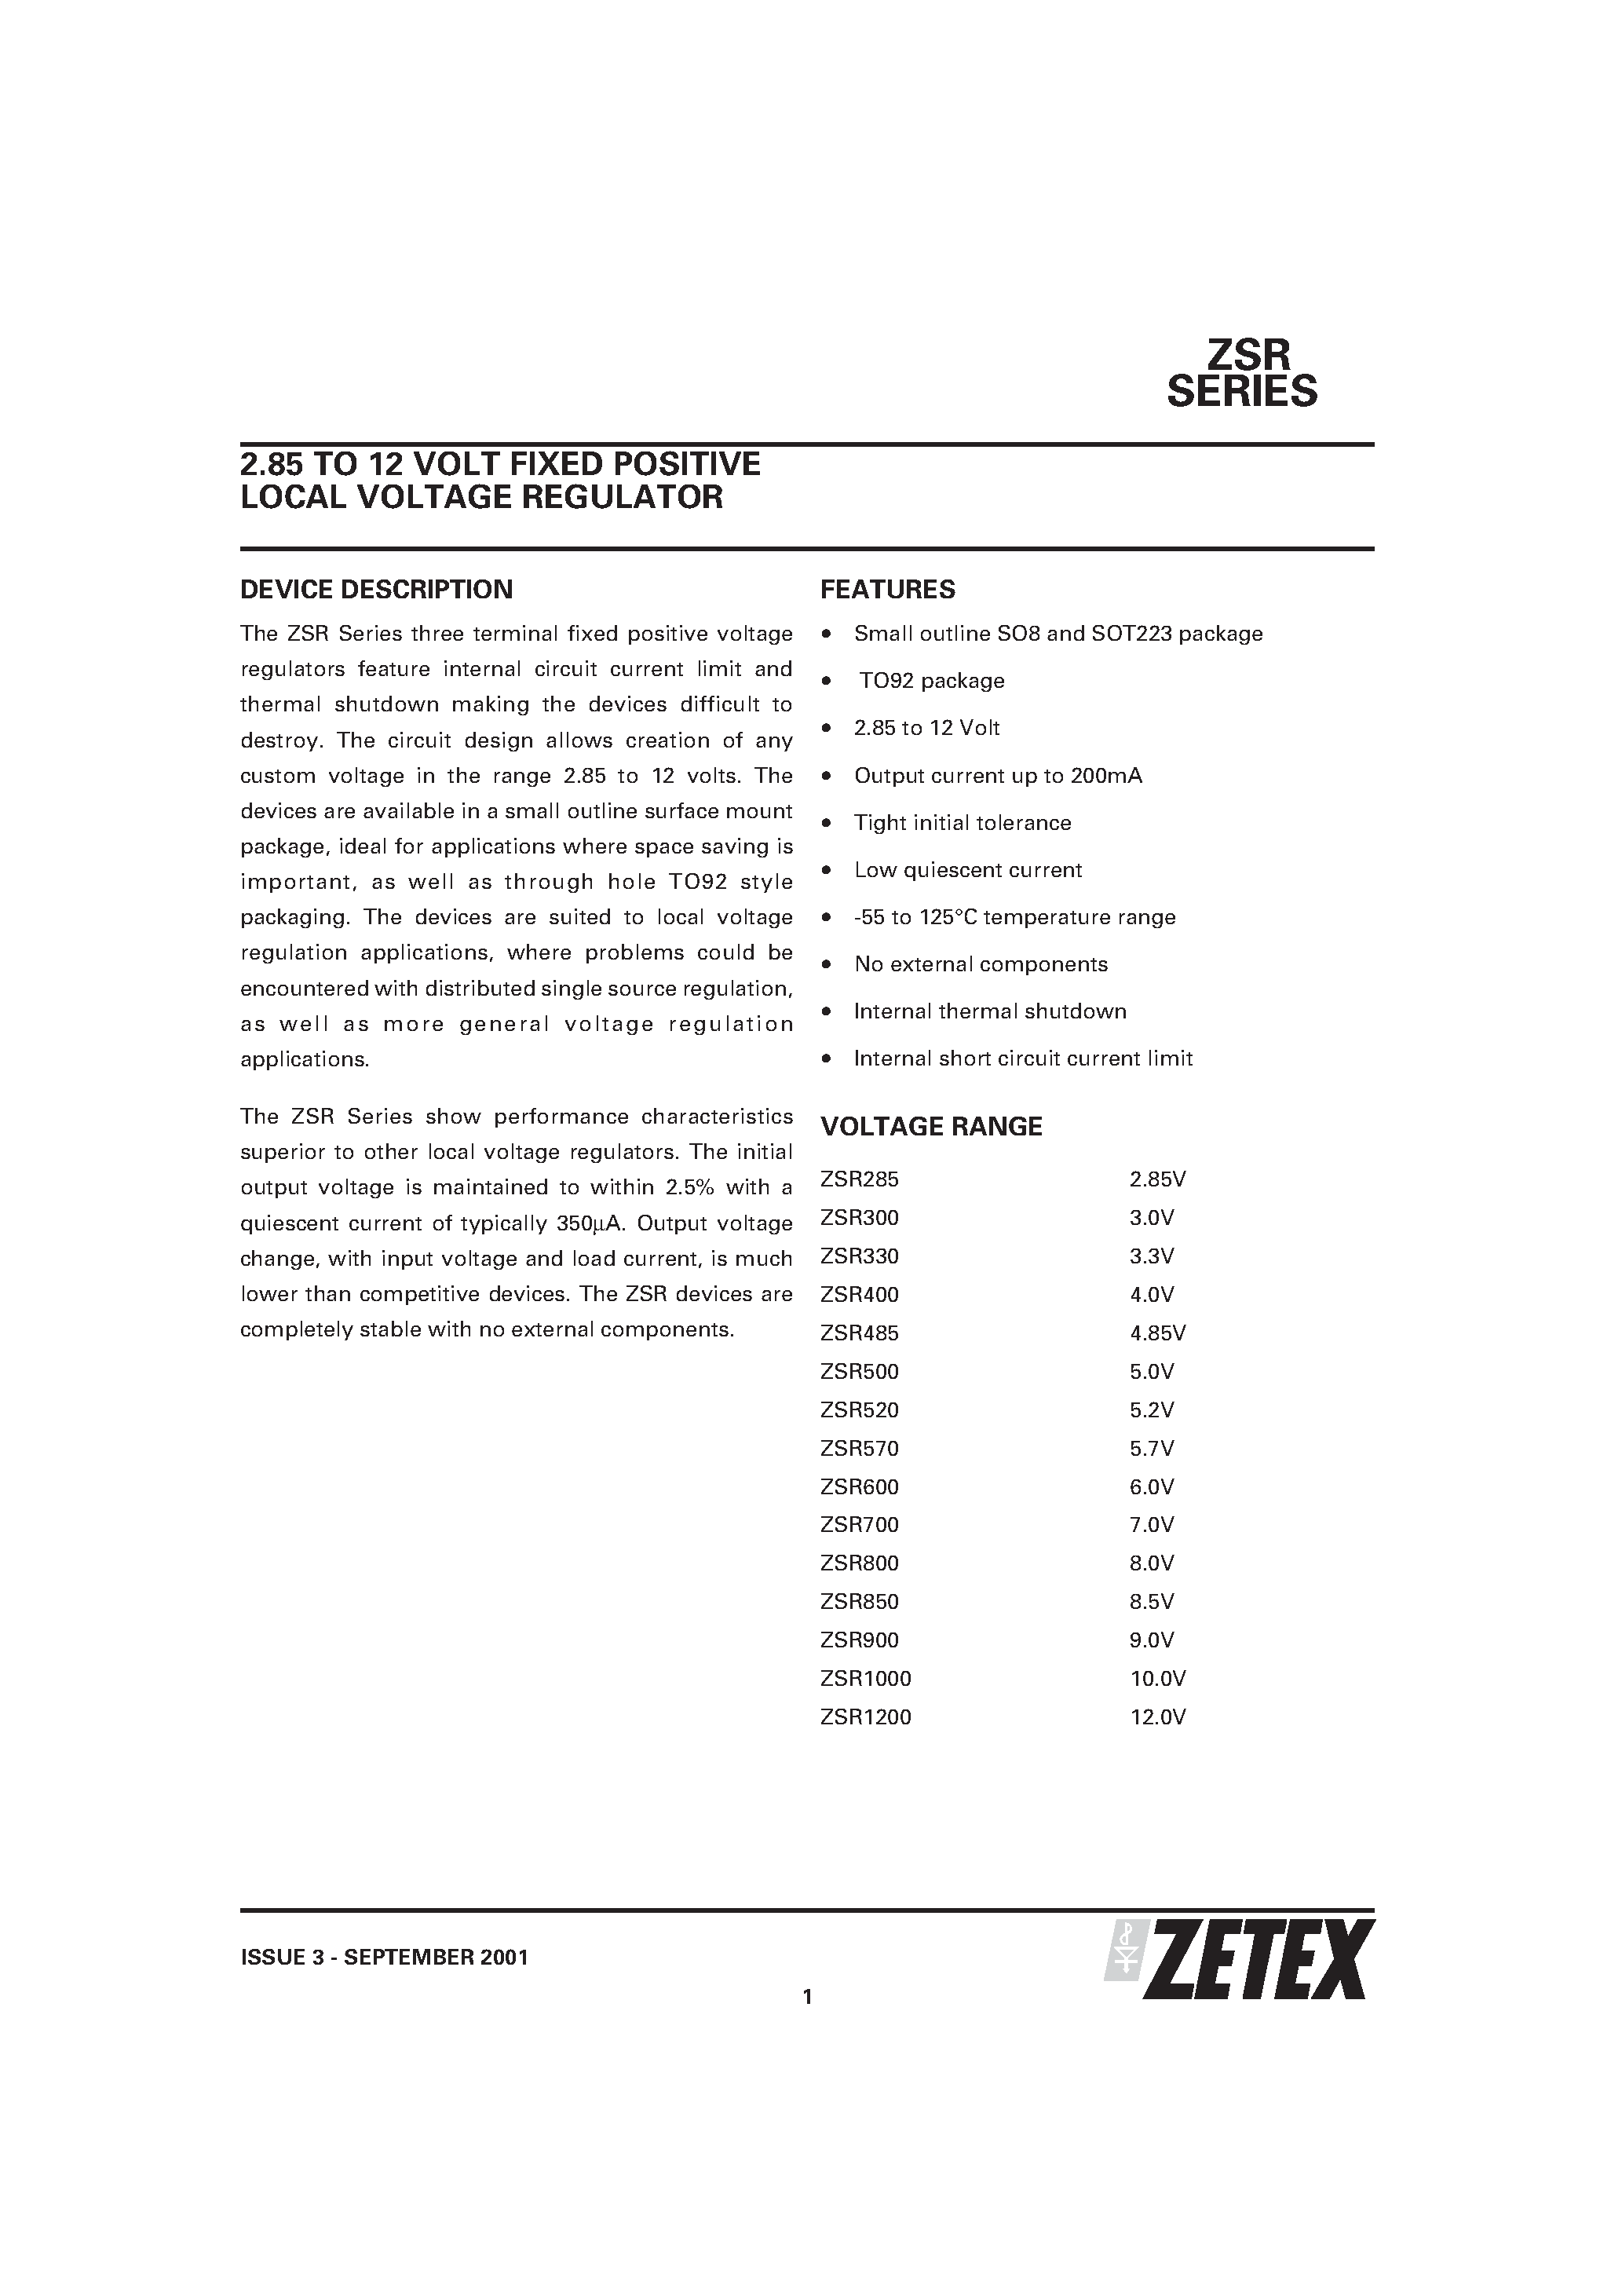 Datasheet ZSR800G - 2.85 TO 12 VOLT FIXED POSITIVE LOCAL VOLTAGE REGULATOR page 1